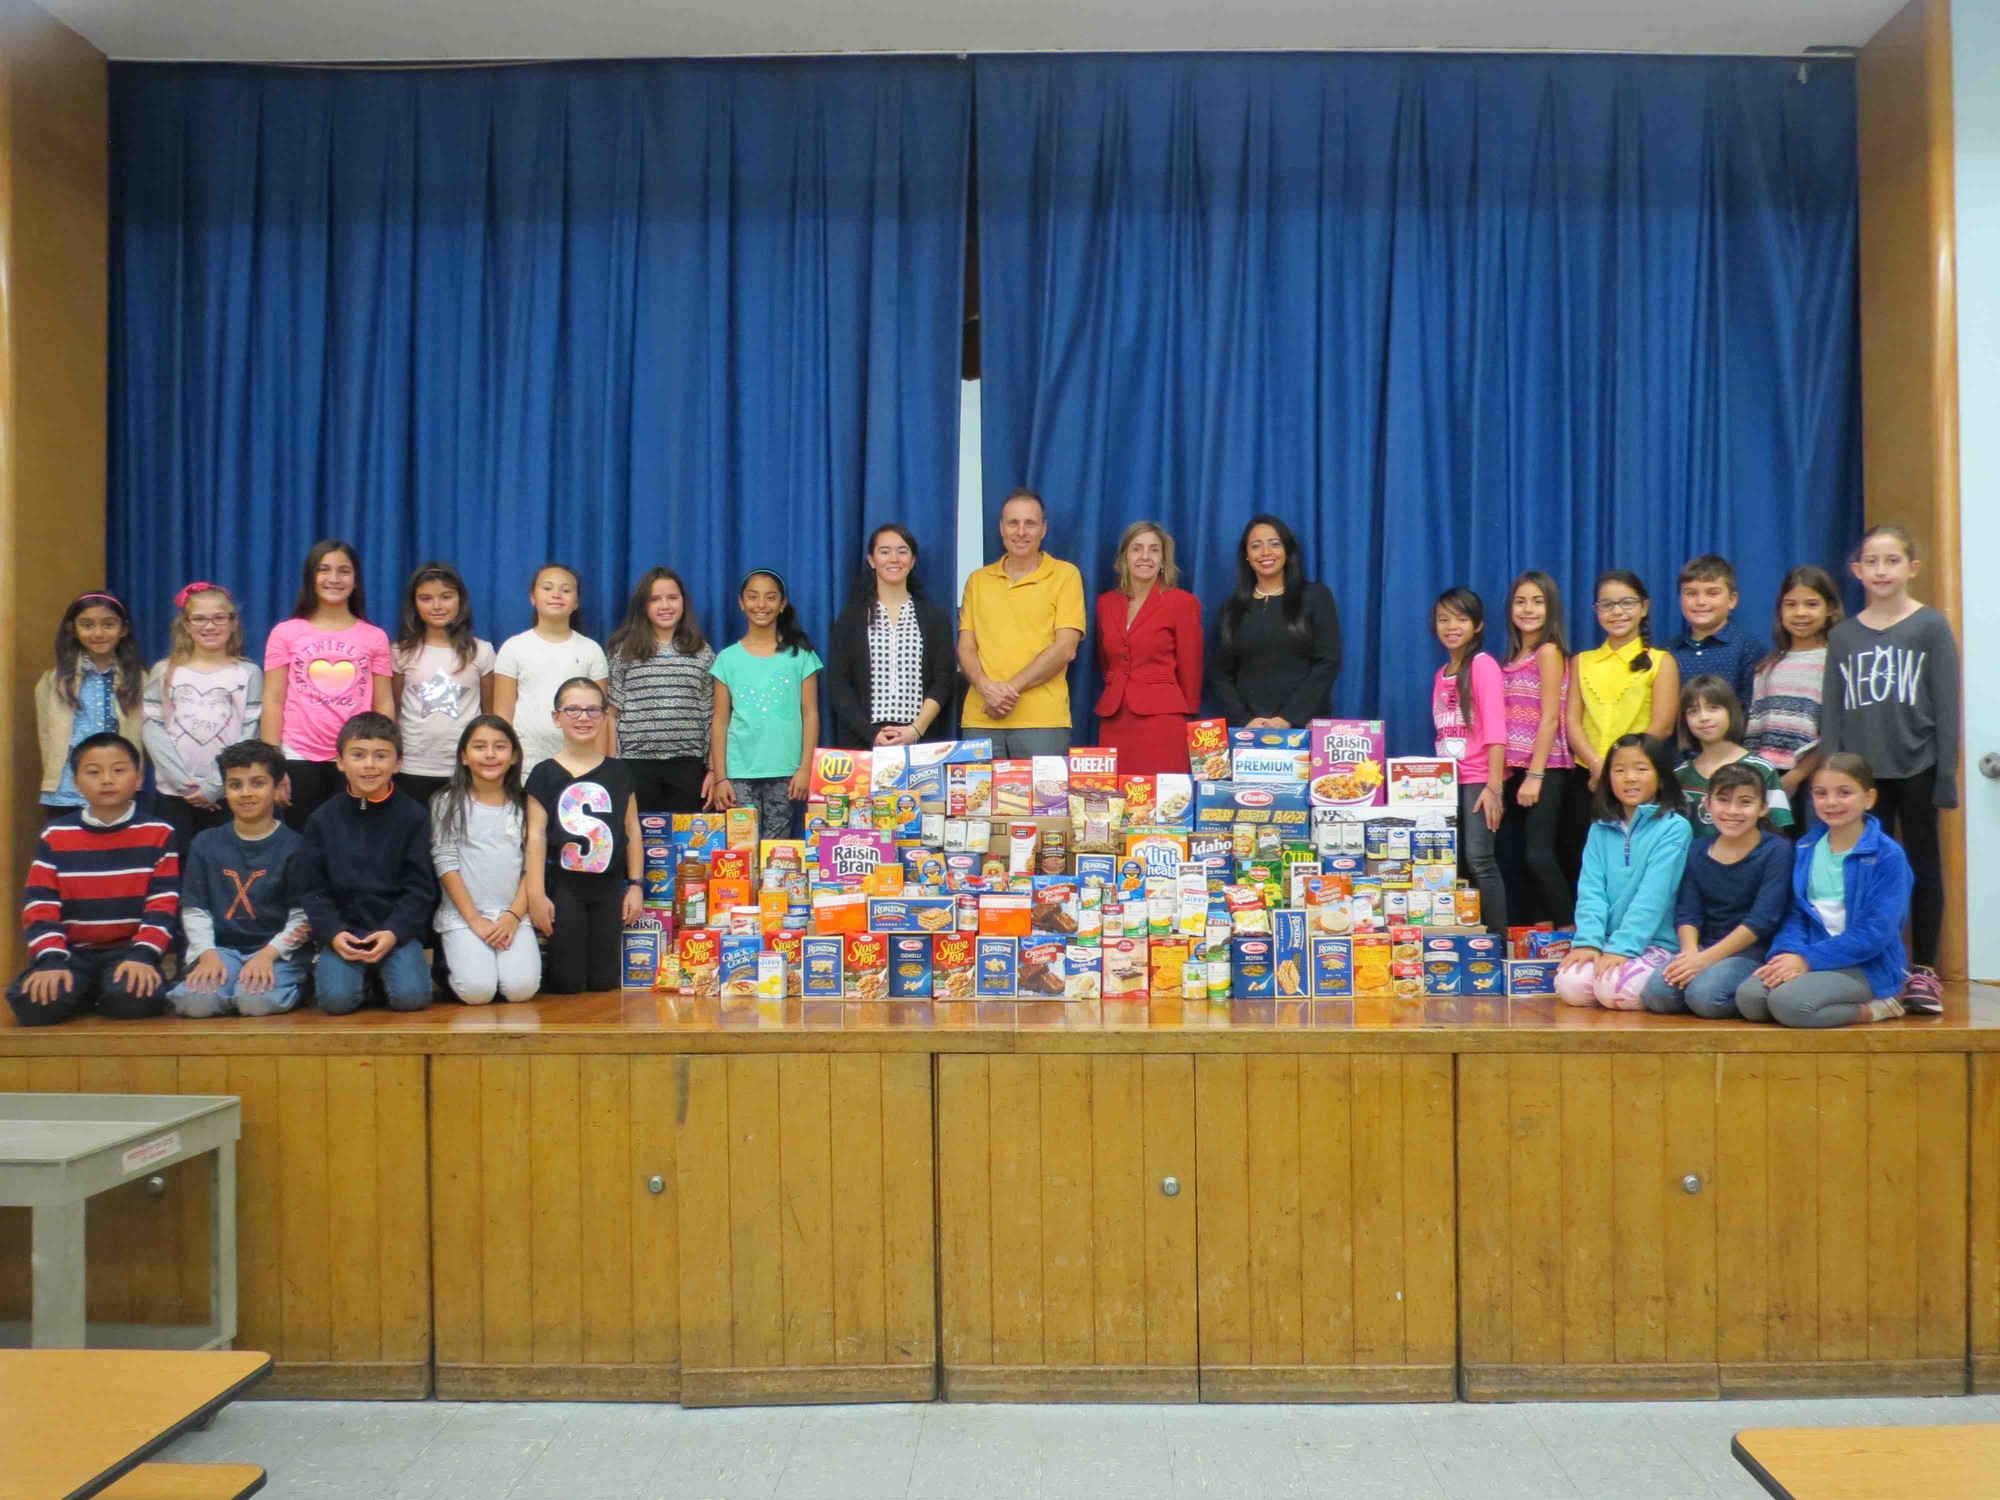 From Nov. 2 through 19, the Bowling Green Elementary School Kiwanis Club collected 800 pounds of non-perishable food for local families in need.